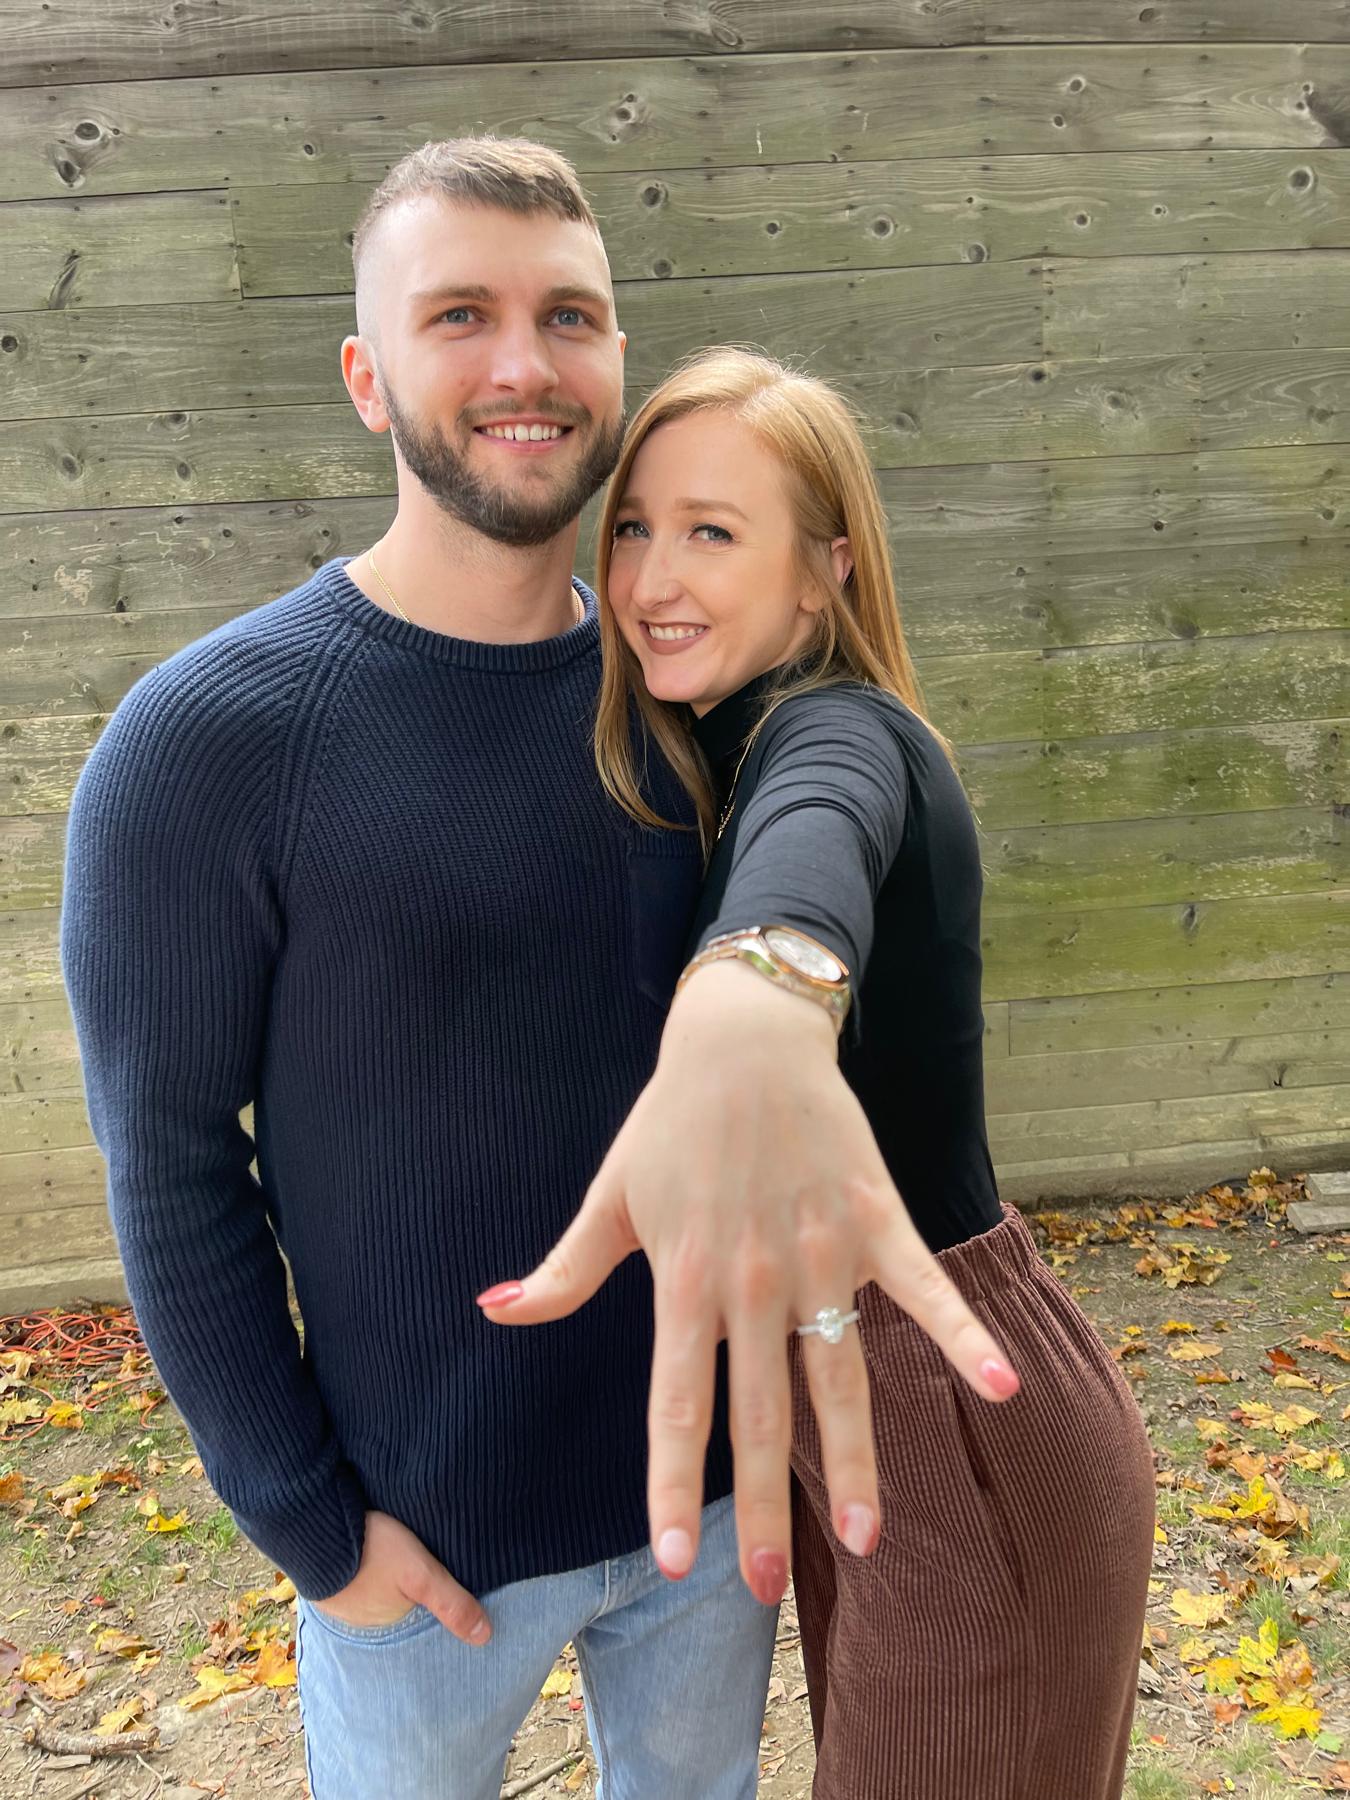 We’re engaged!